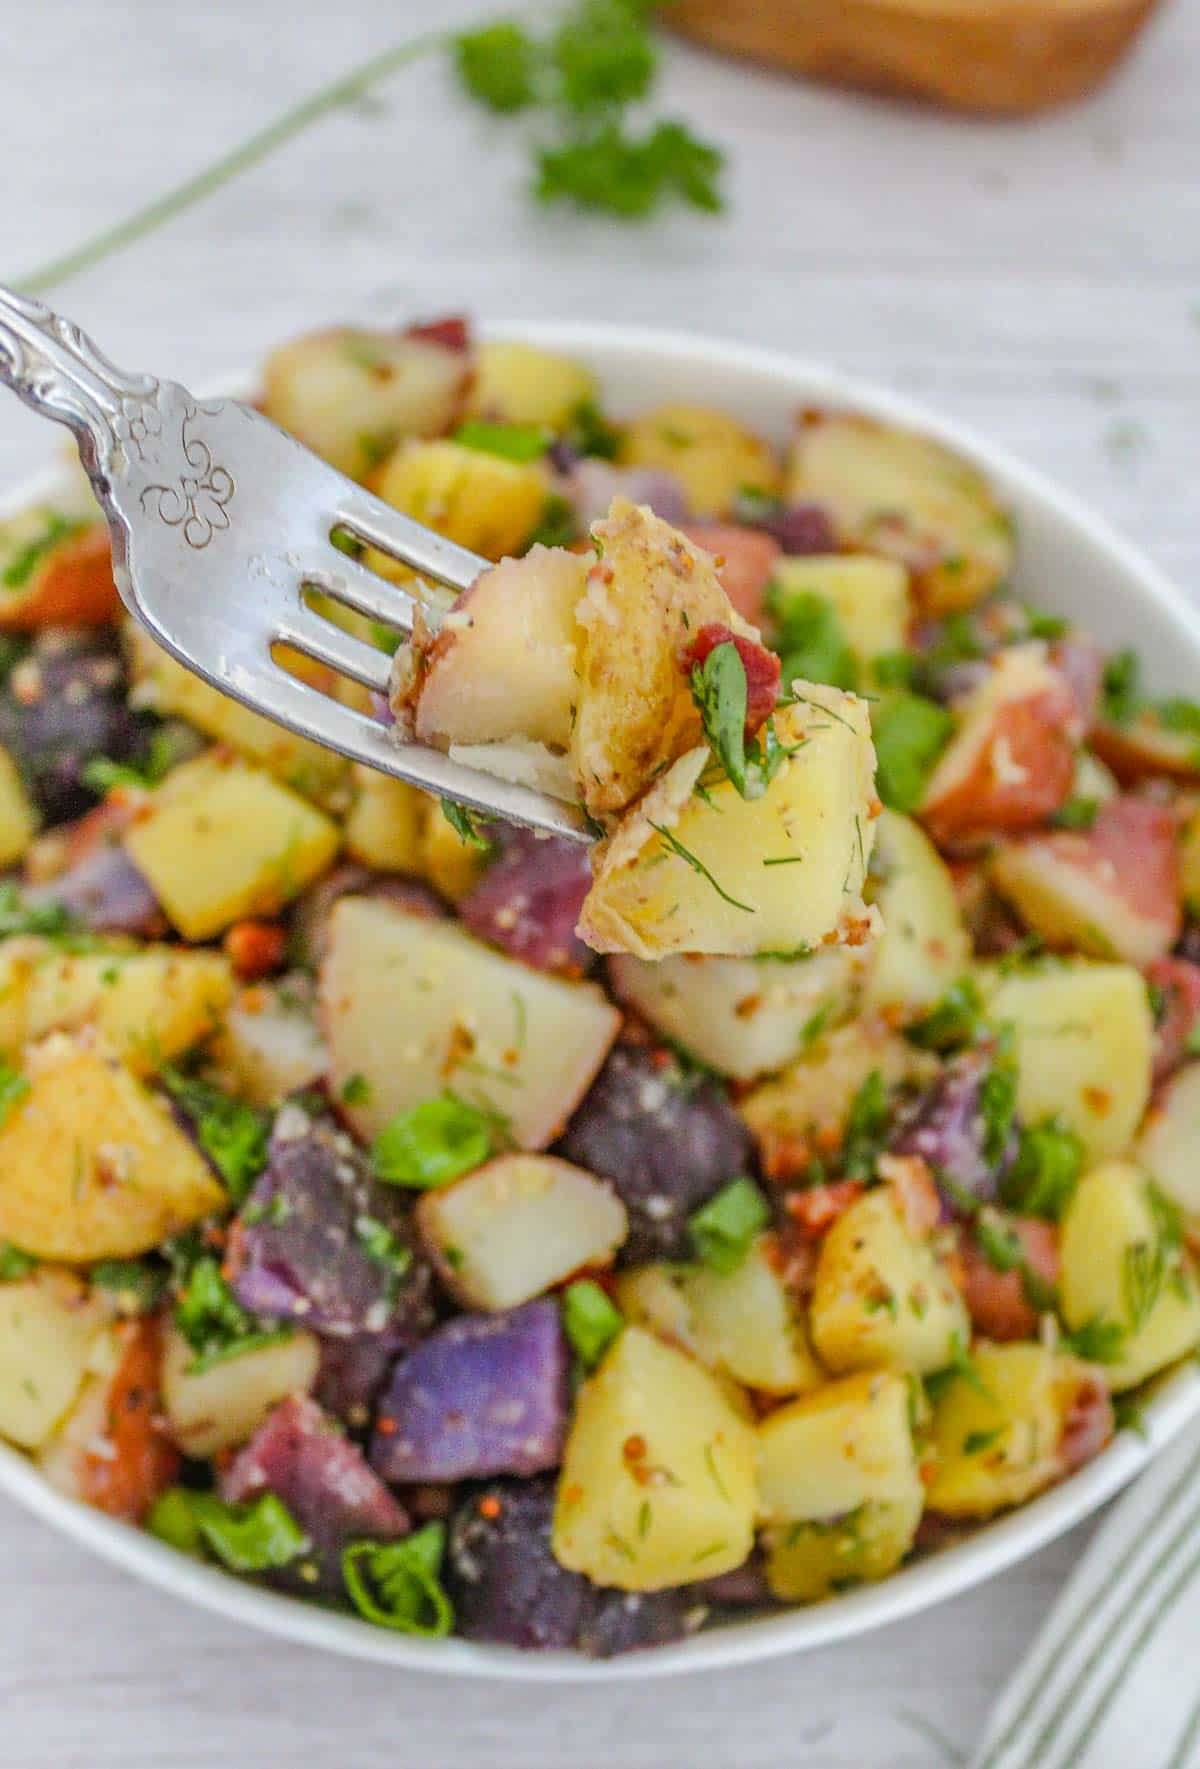 A bowl of german potato salad with a fork picking up cubes of potatoes.